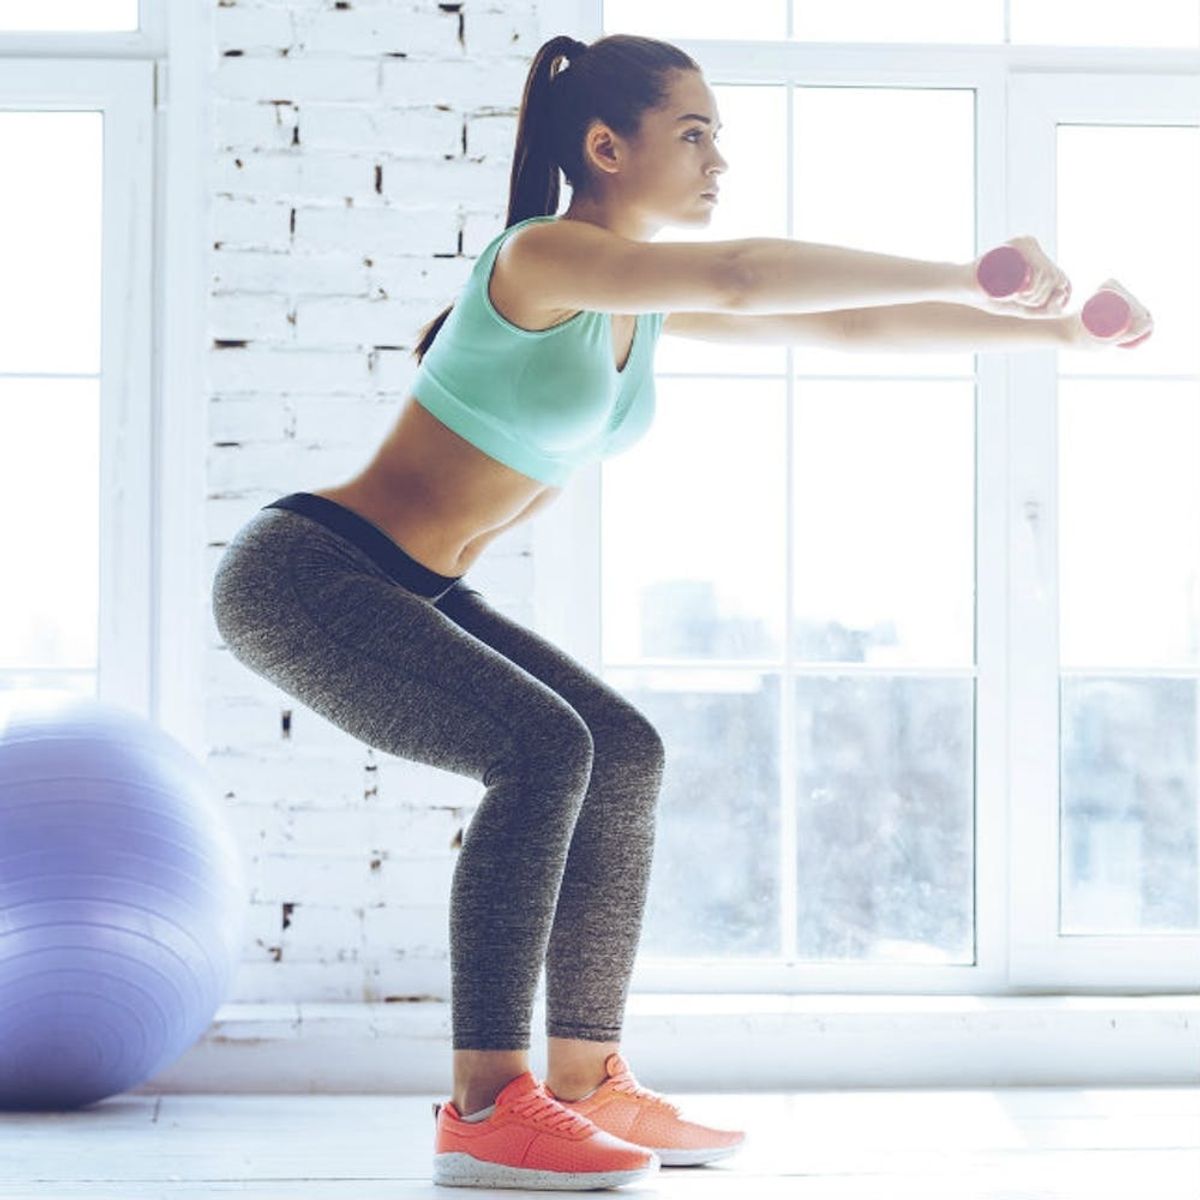 These 9 Moves Will Give Your Glutes the Workout They Deserve